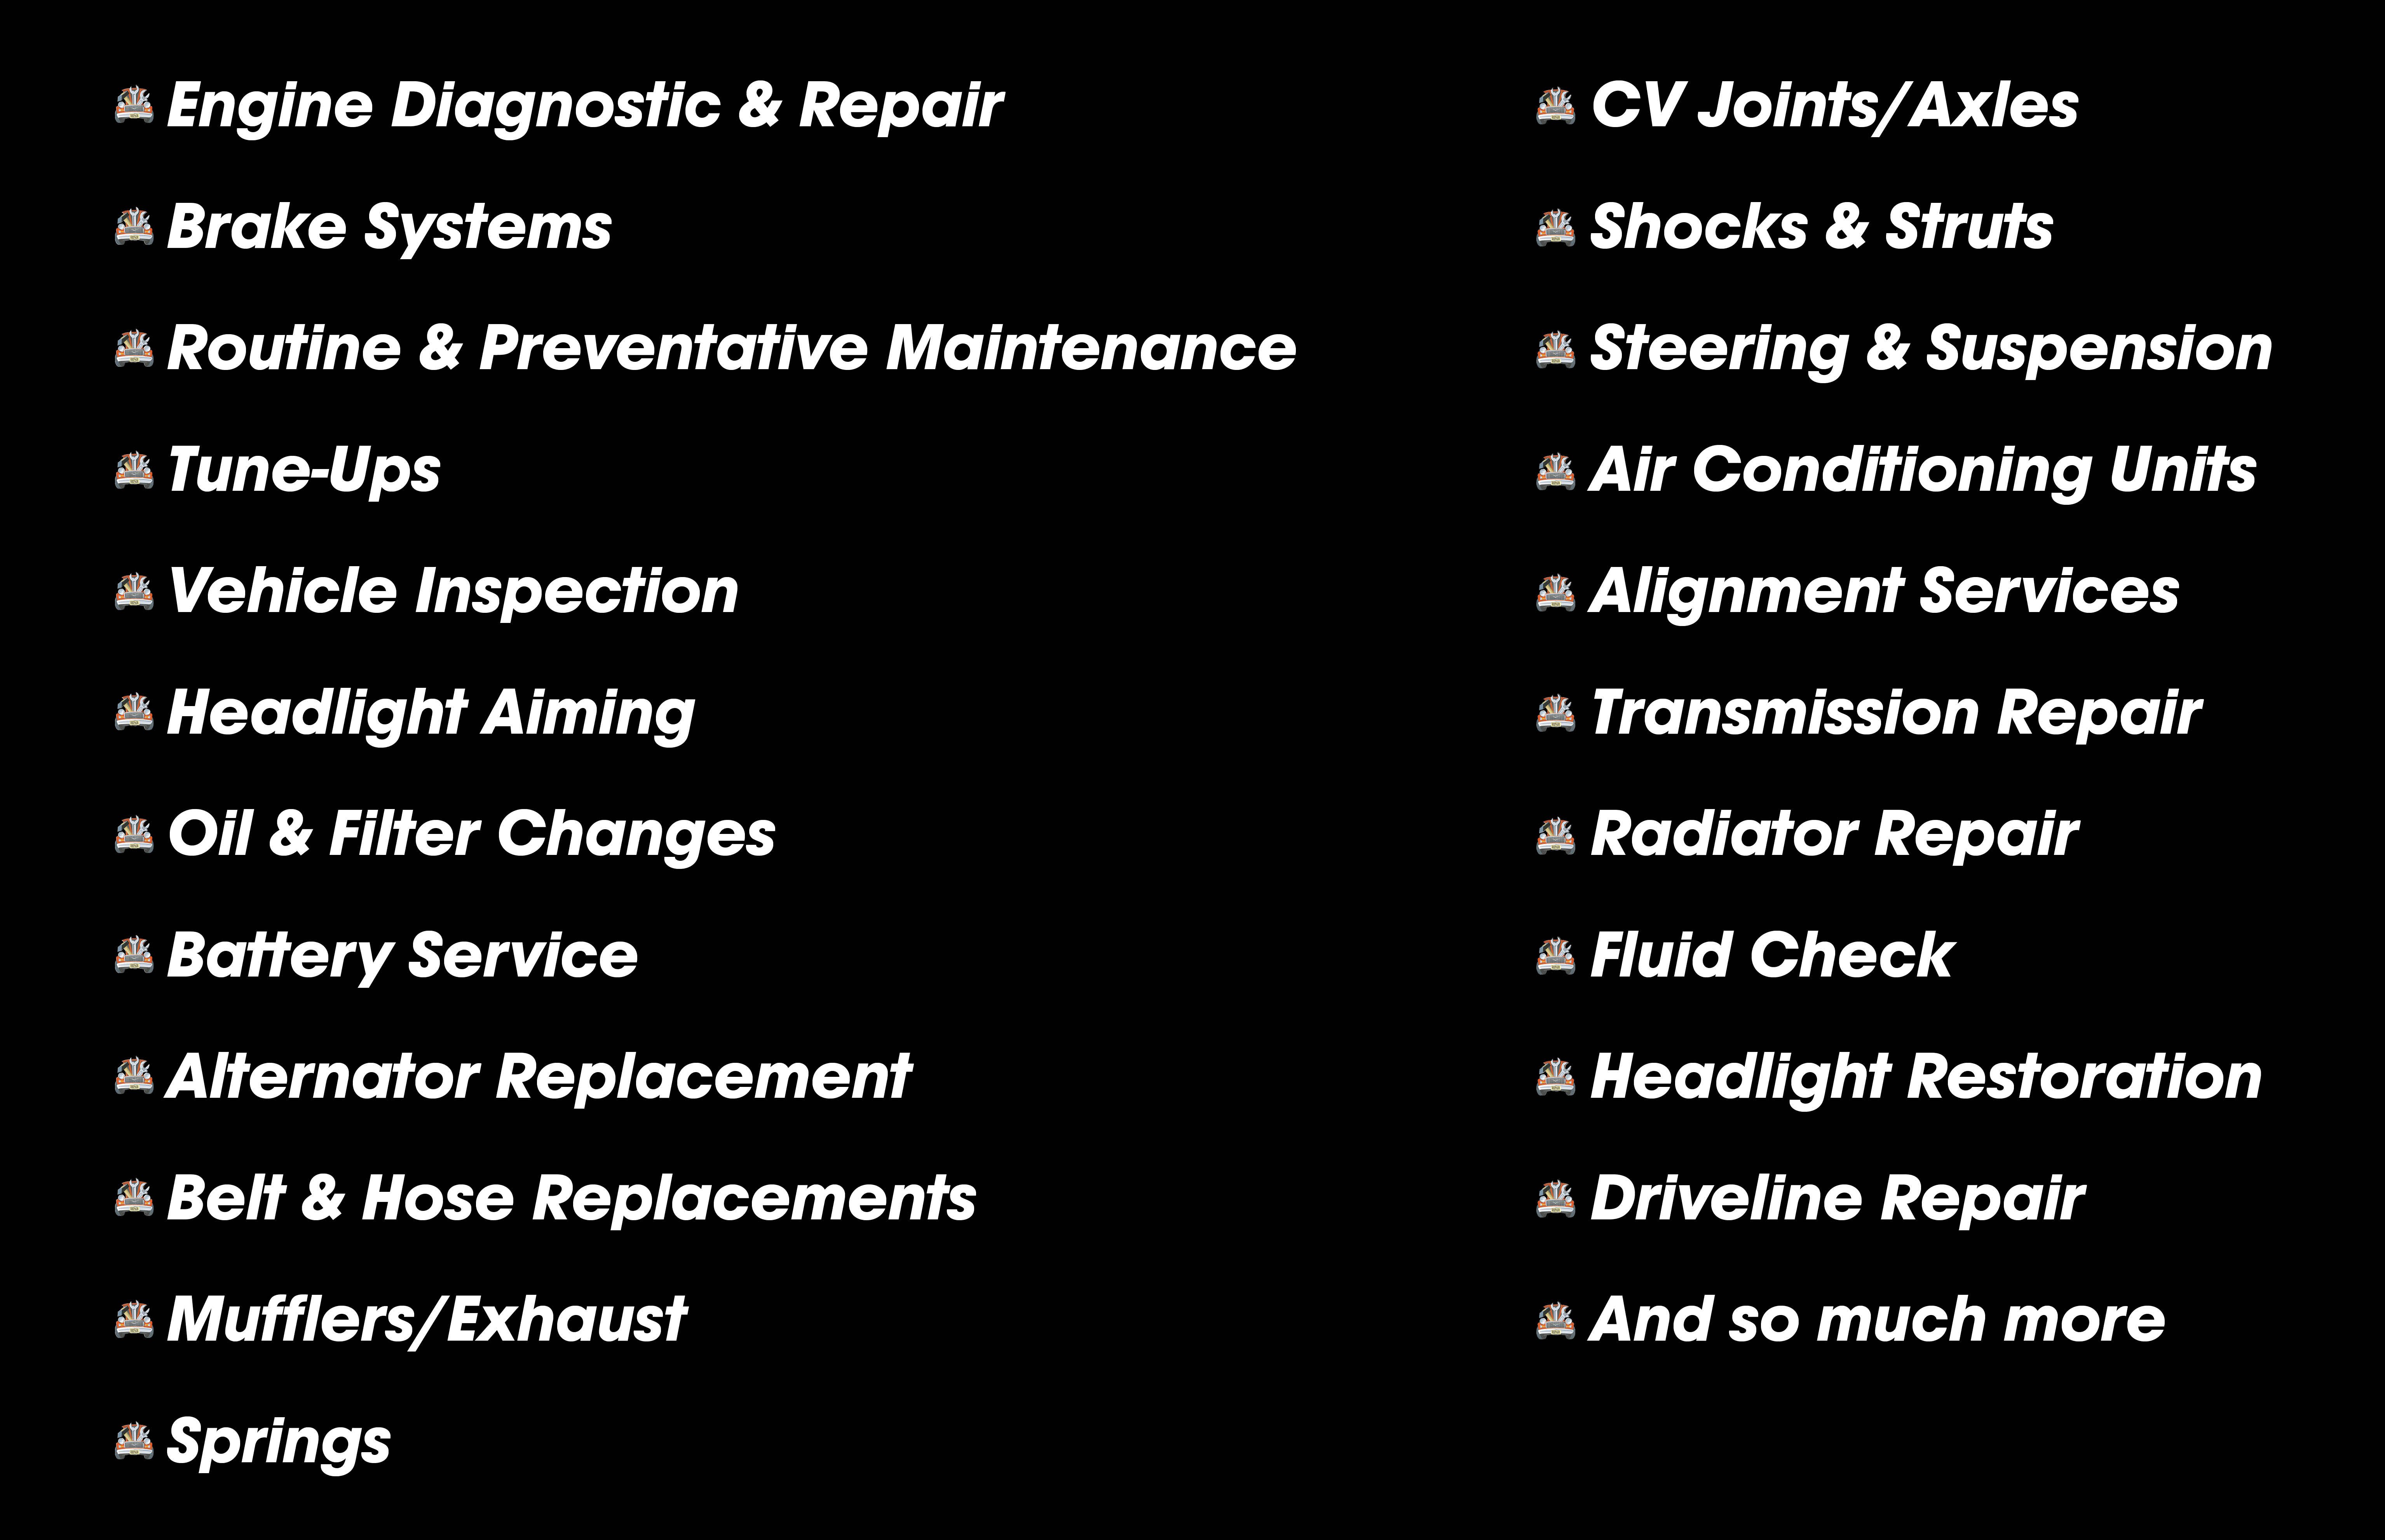 More information about "How To Setup A Products and Services List For Auto Shops"